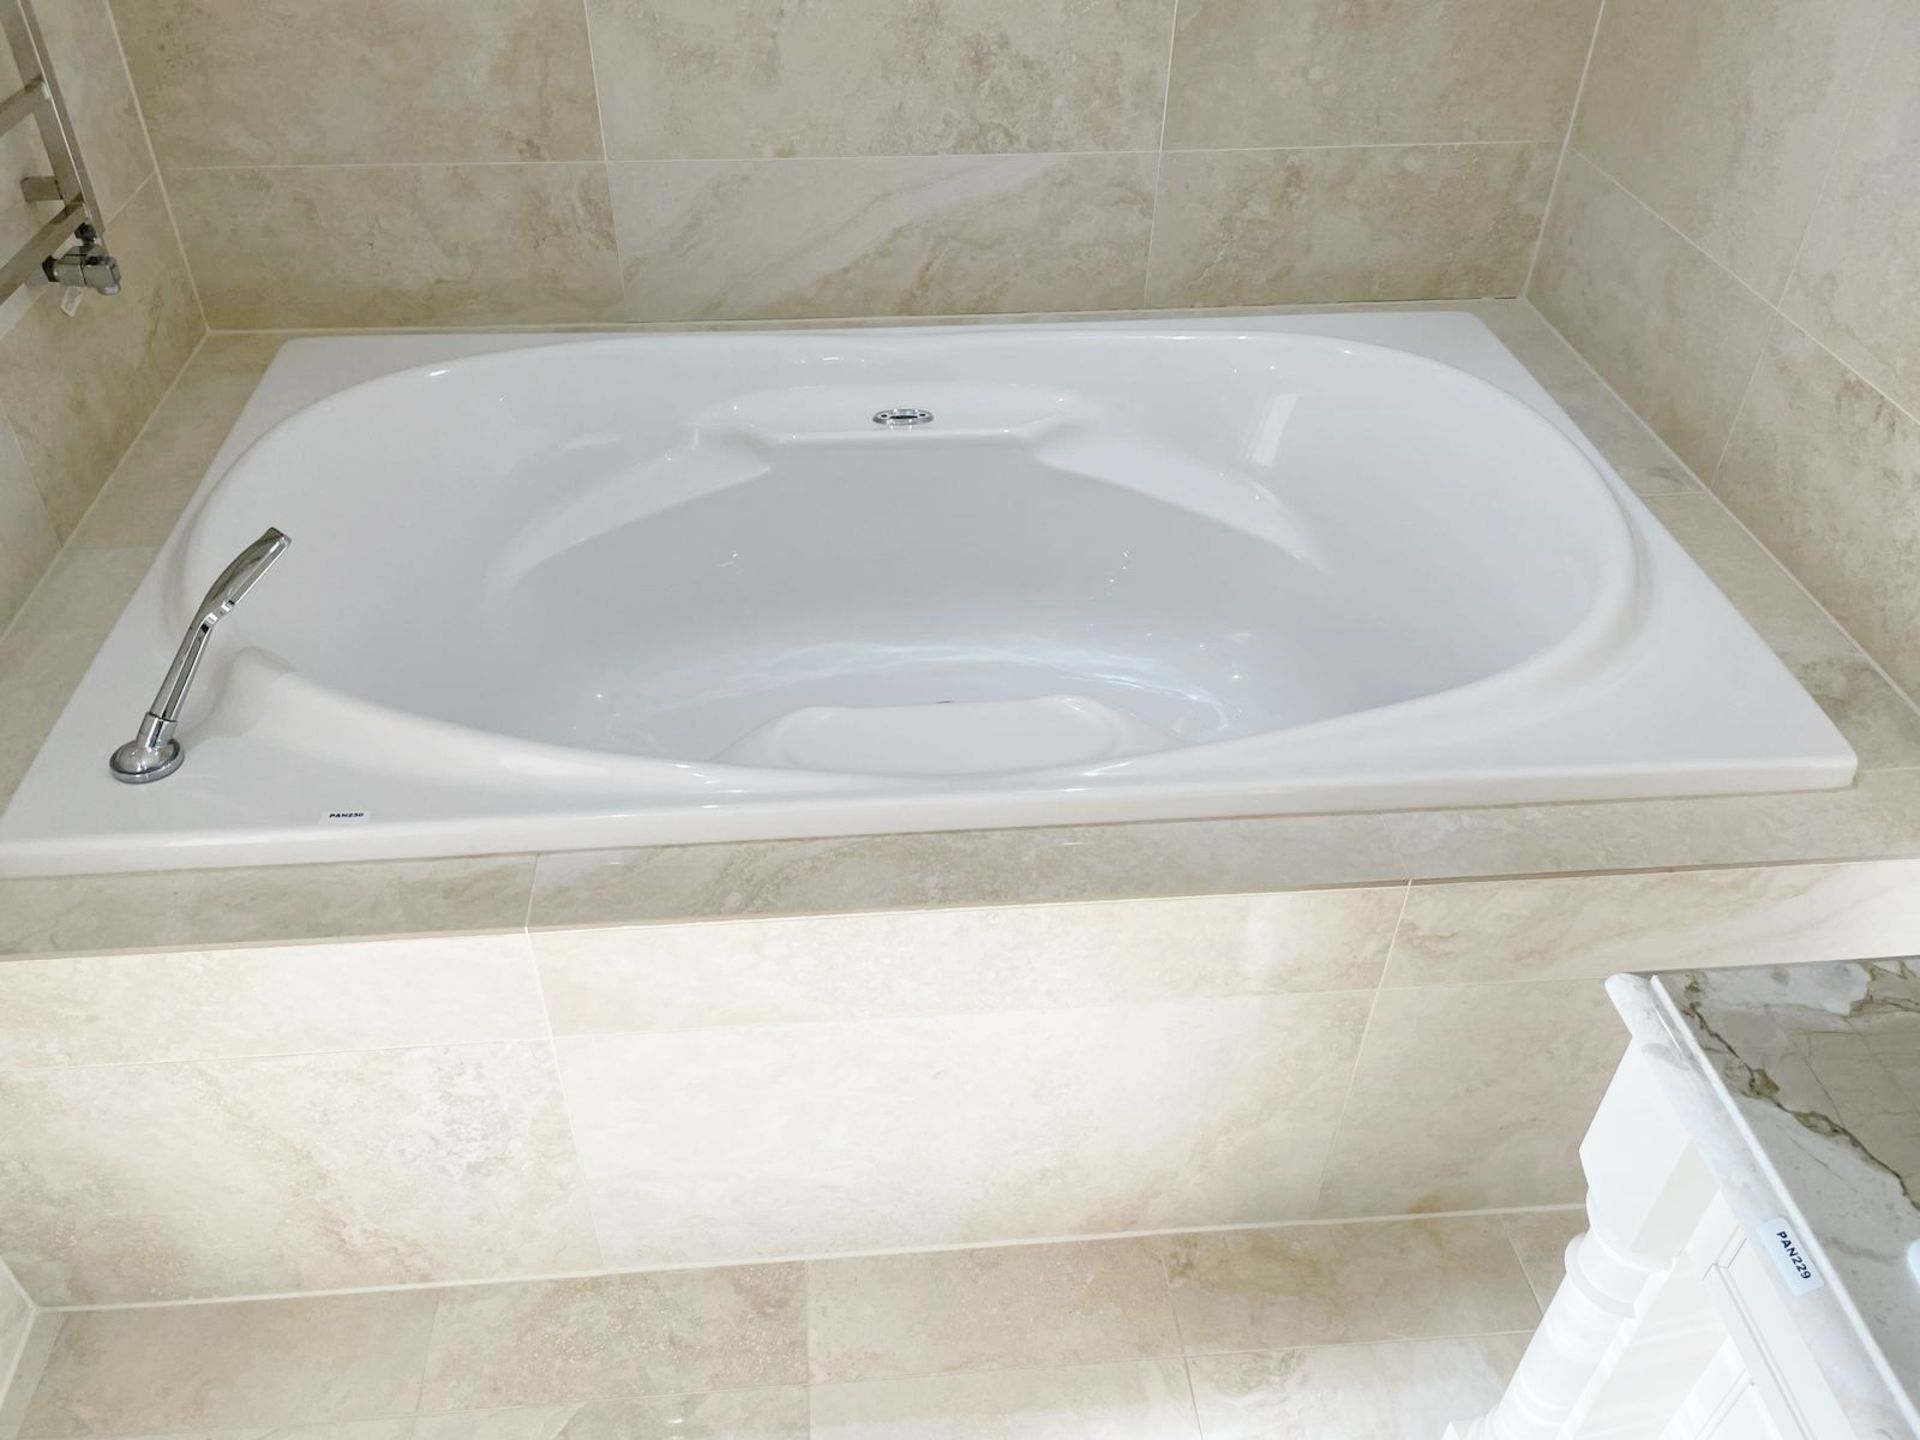 1 x AIRBATH Large Jacuzzi Spa Bath, with Axor Thermostat  - Ref: PAN230 Bed1/bth - CL896 - NO VAT - Image 15 of 20